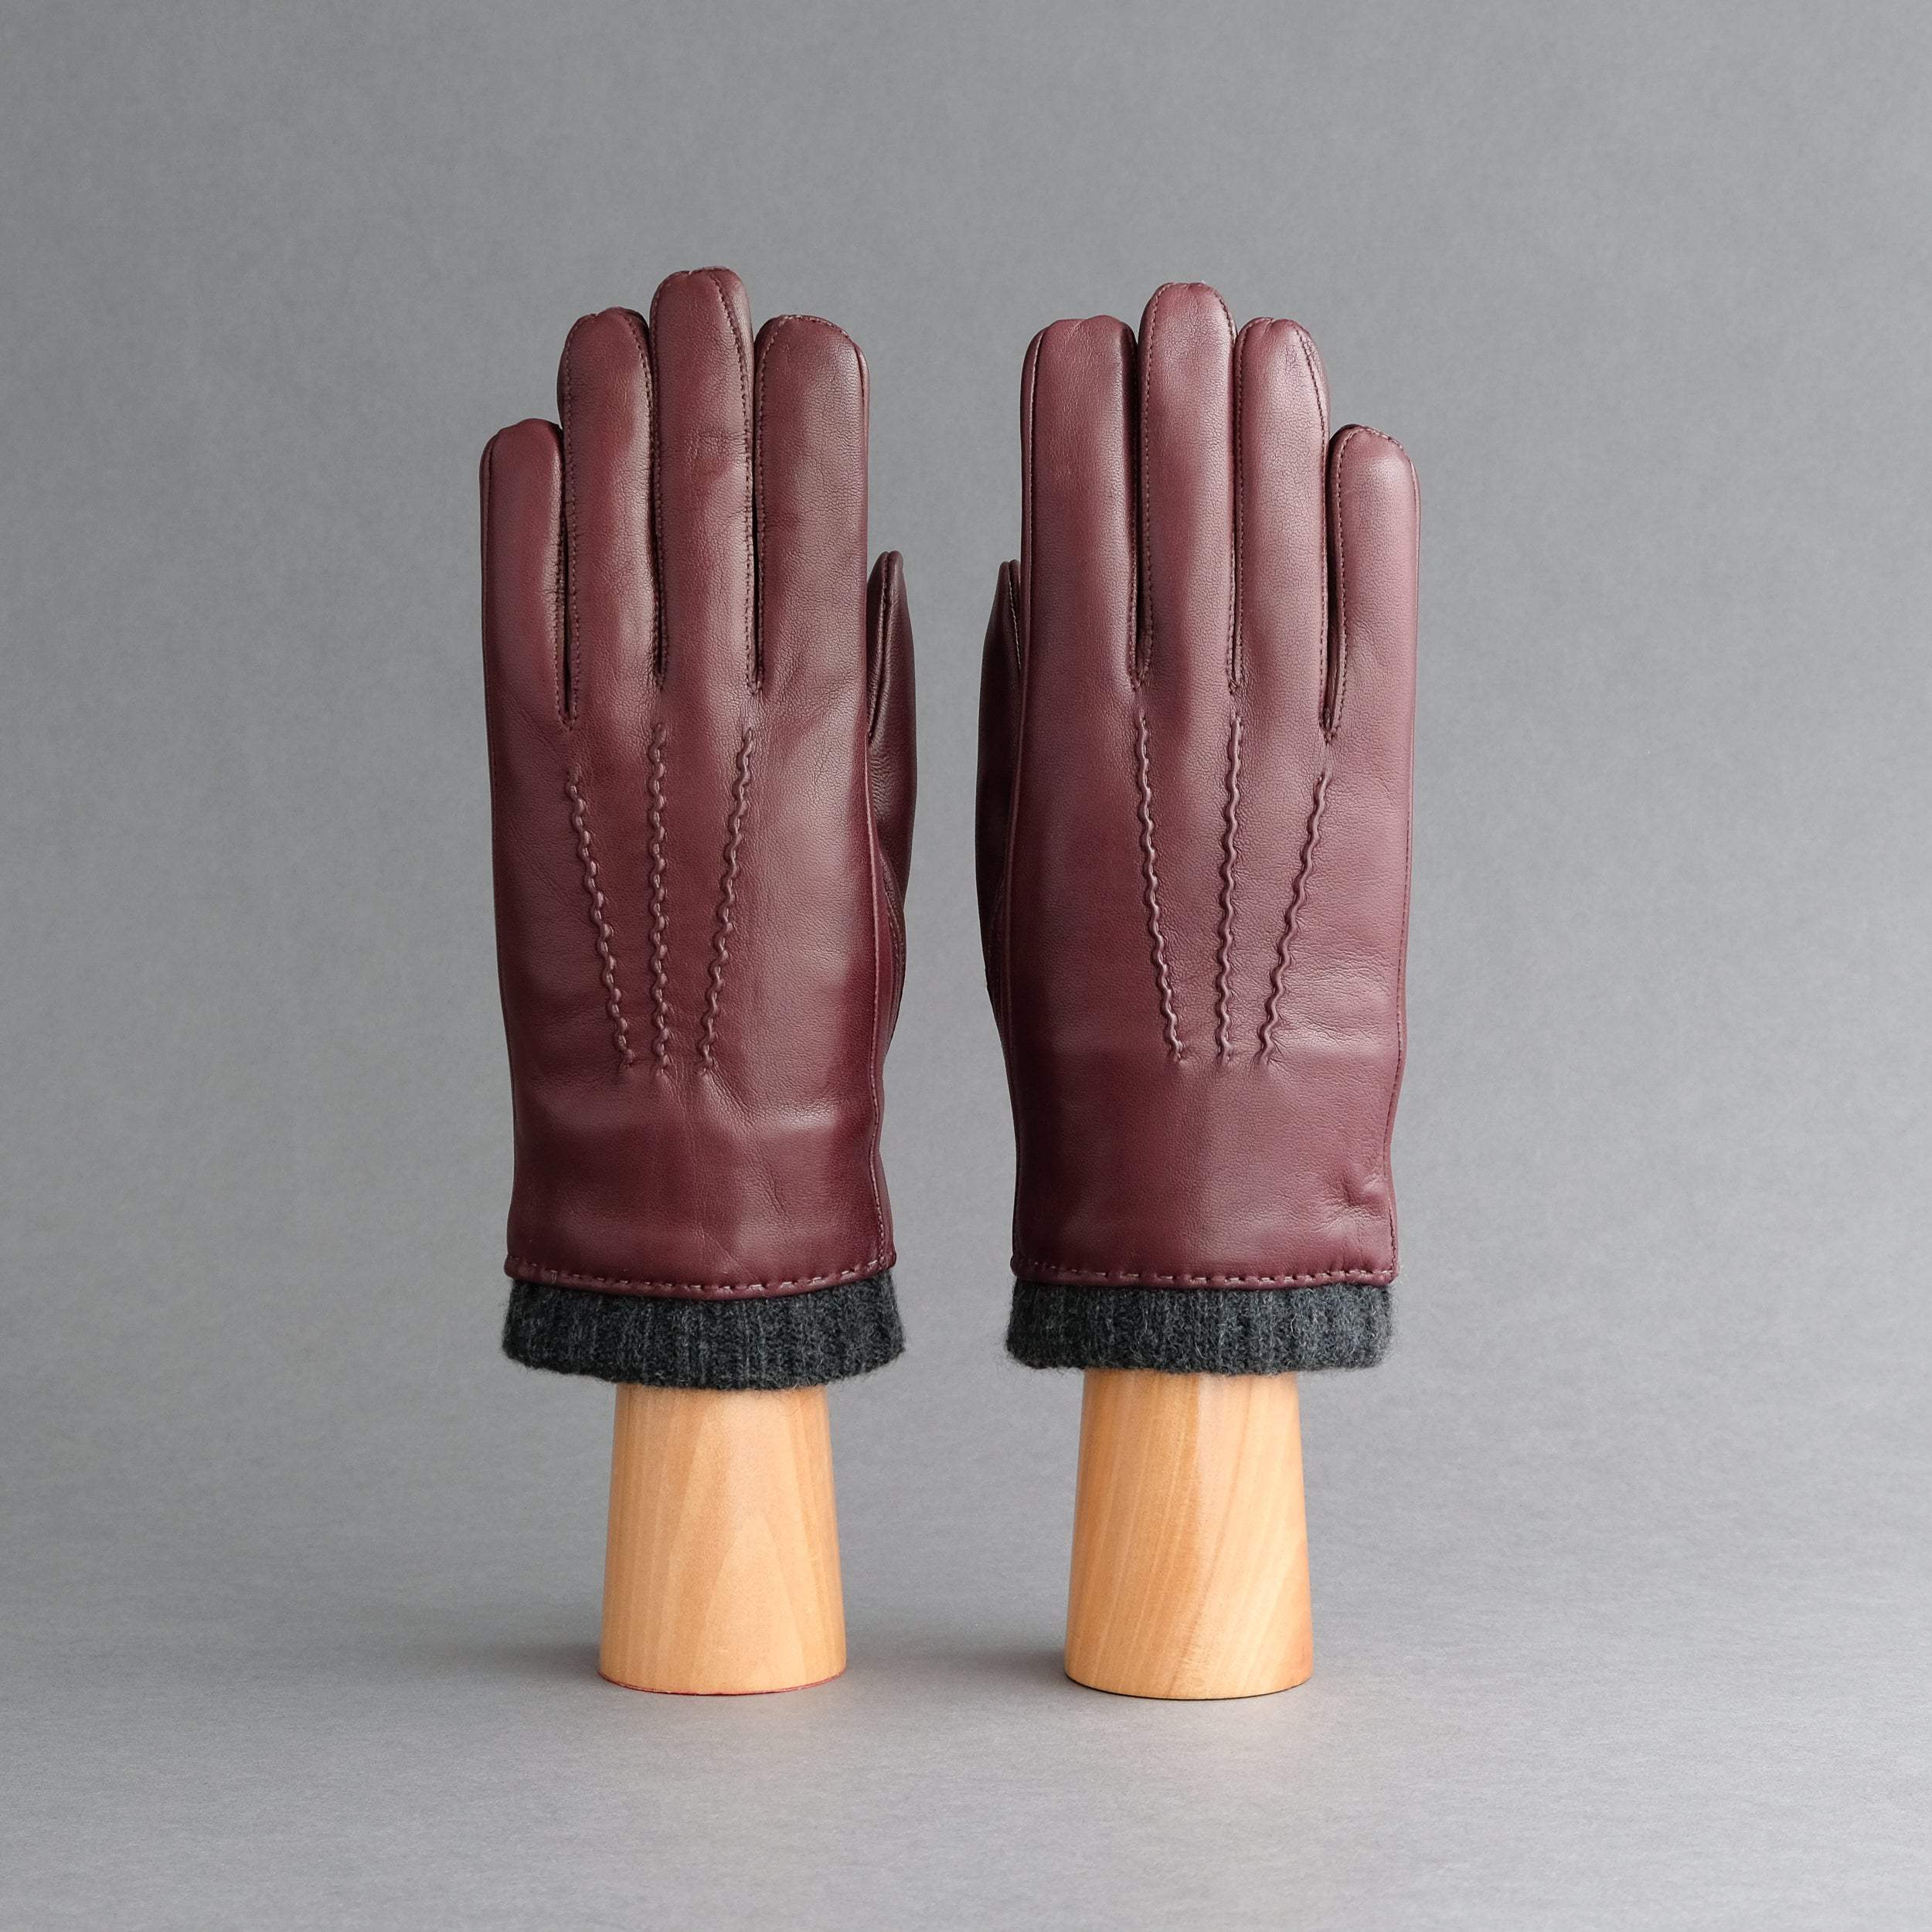 Gentlemen's Gloves from Bordeaux Hair Sheep Nappa Lined With Cashmere - TR Handschuhe Wien - Thomas Riemer Handmade Gloves